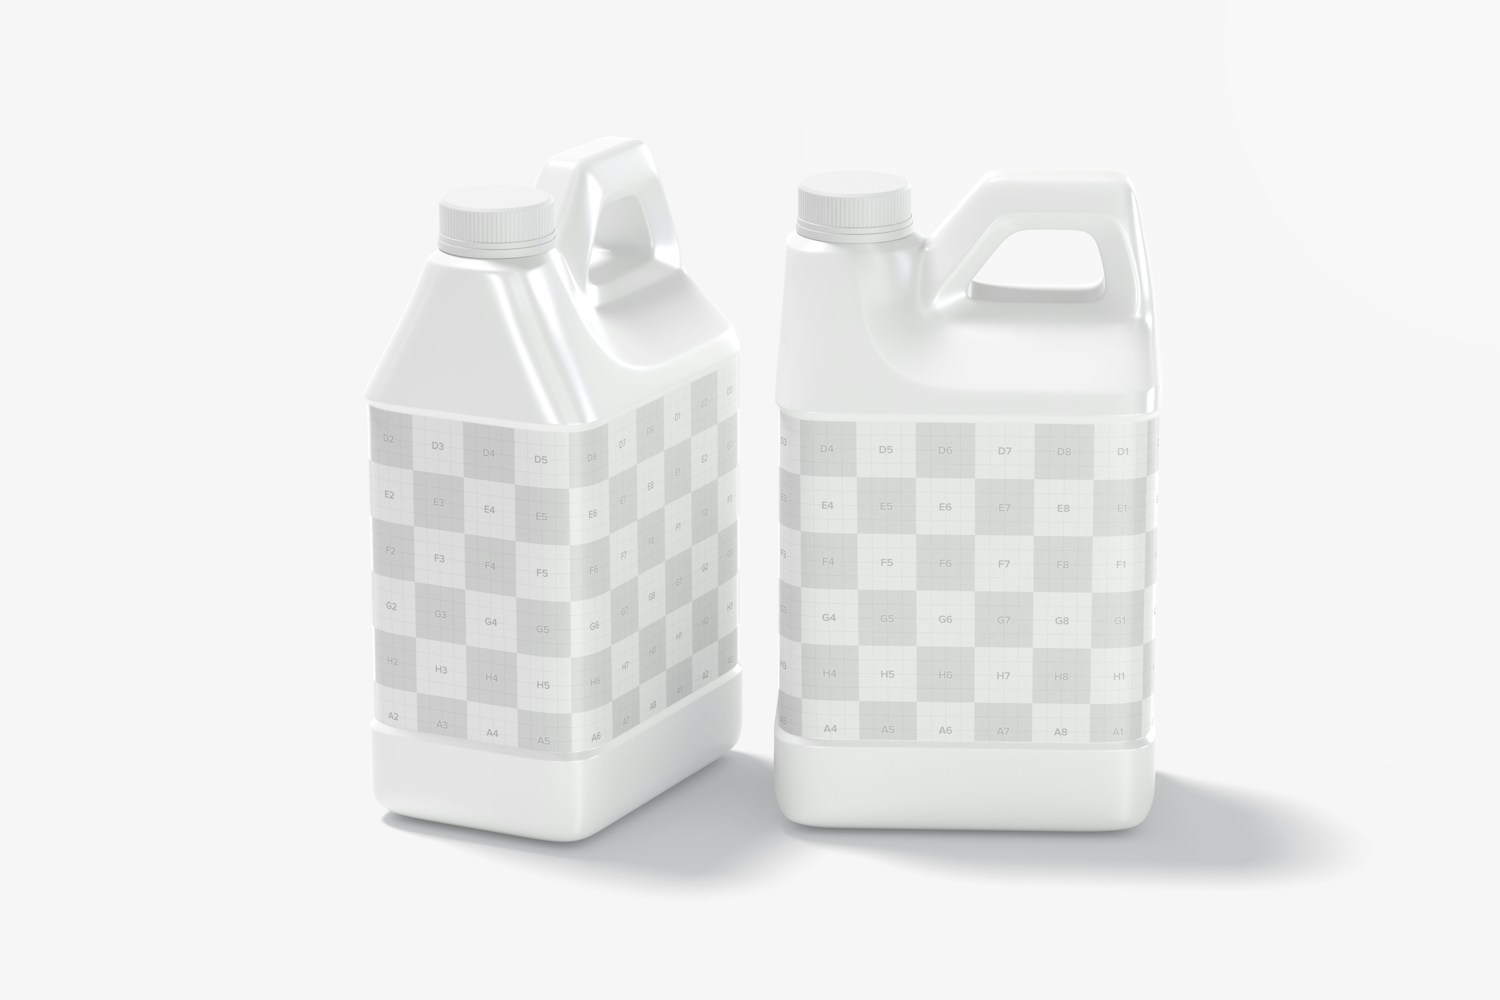 64 oz Plastic Jugs Mockup, Side and Front View